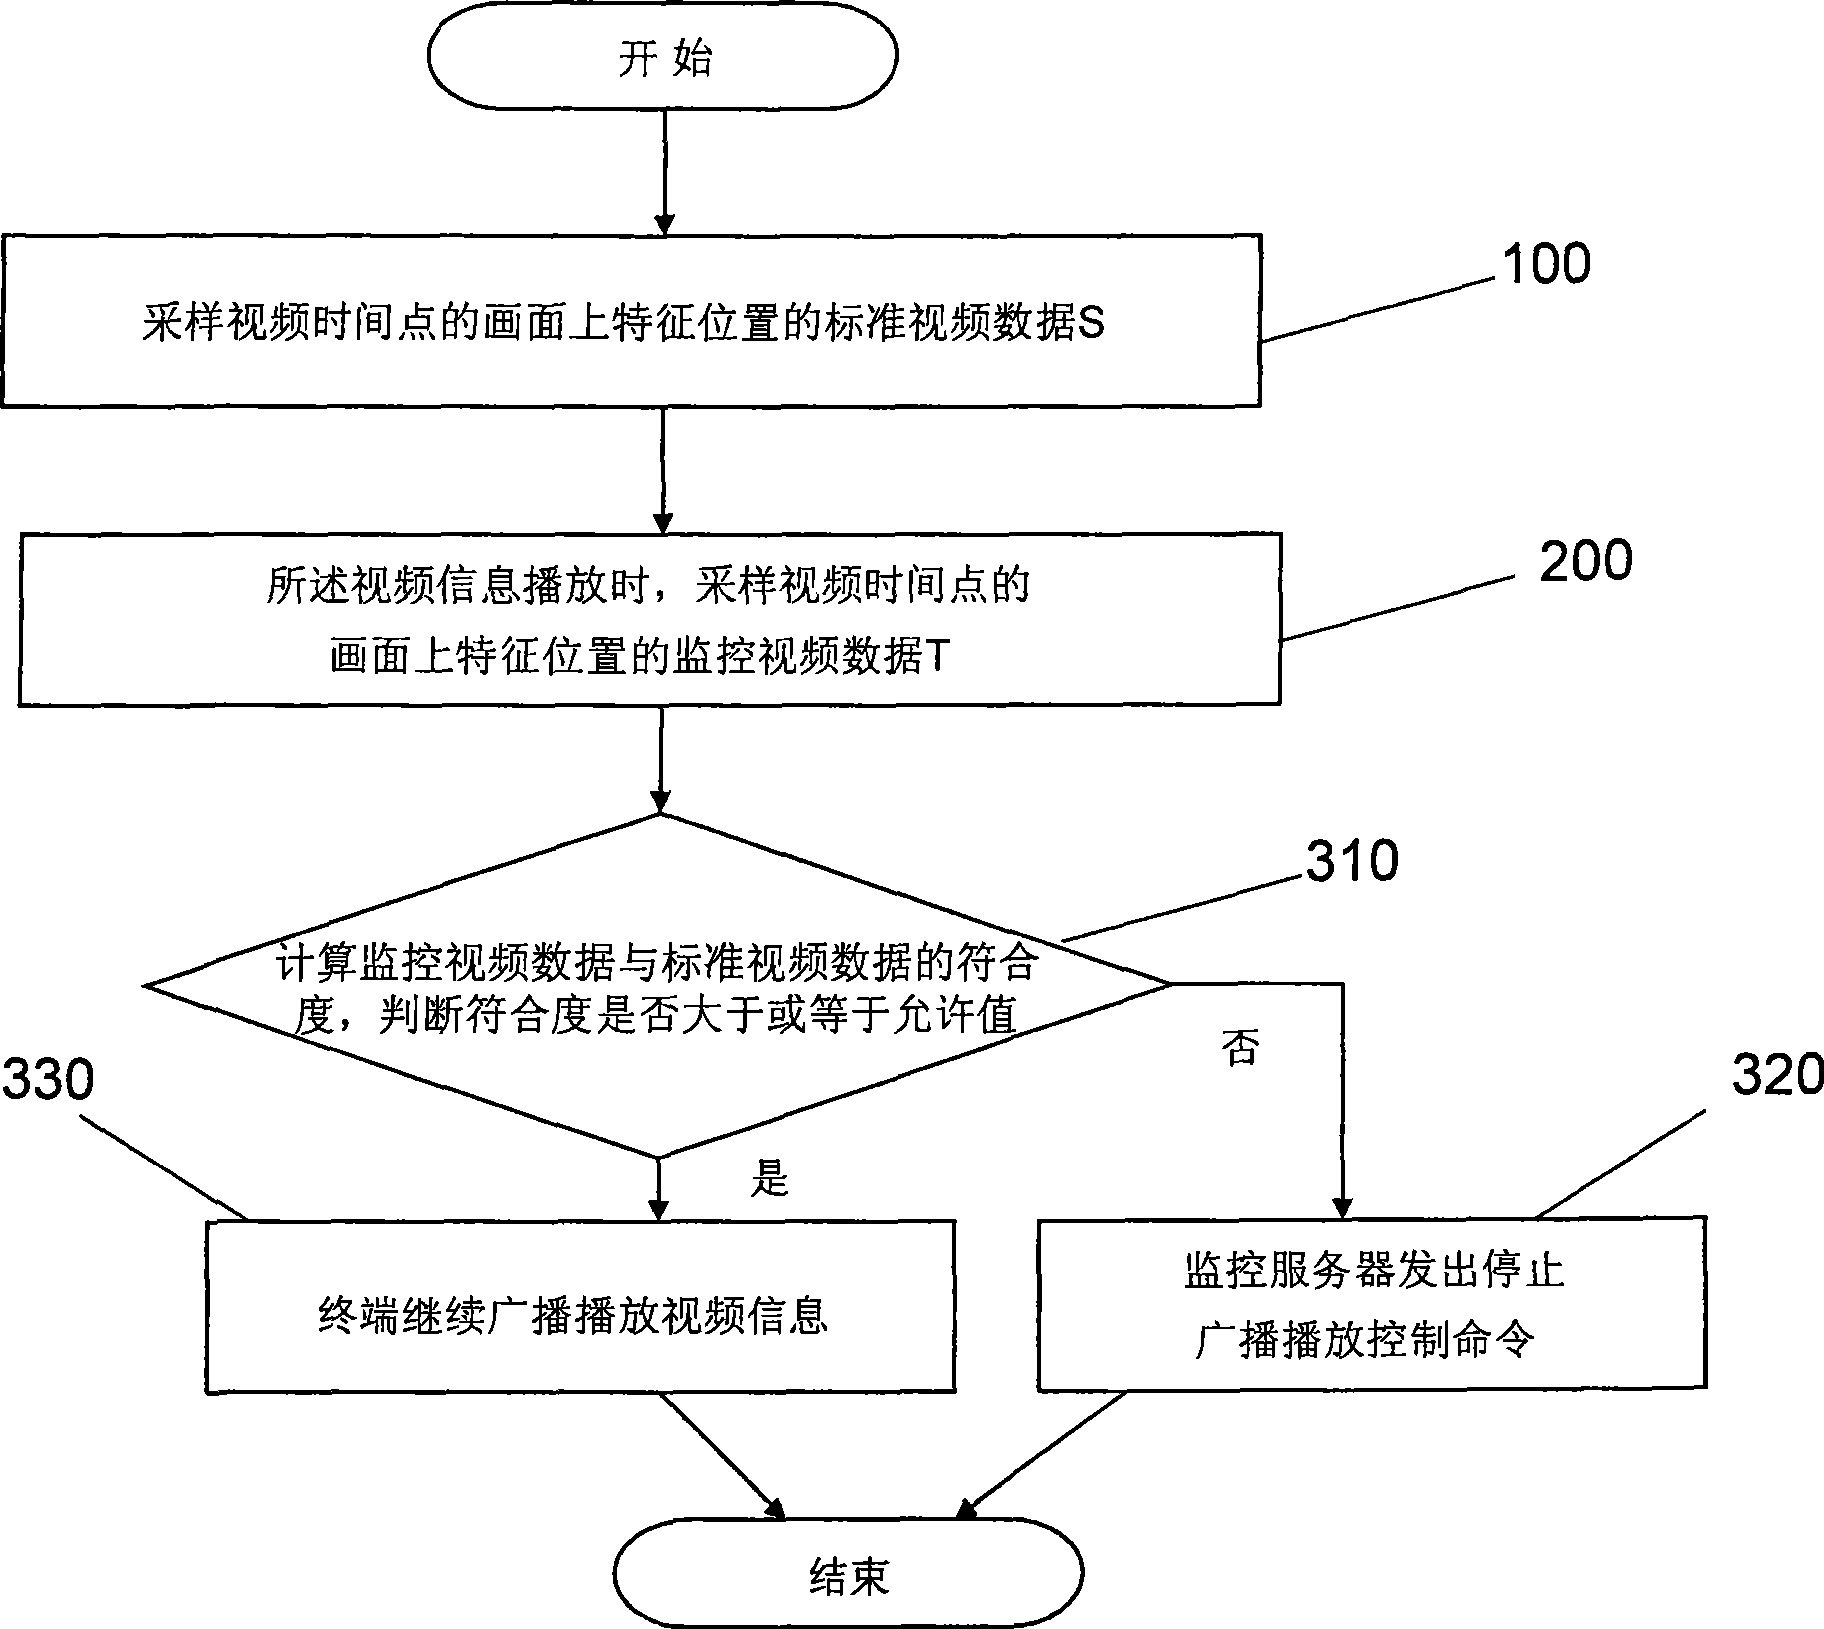 Monitoring method for video information display content